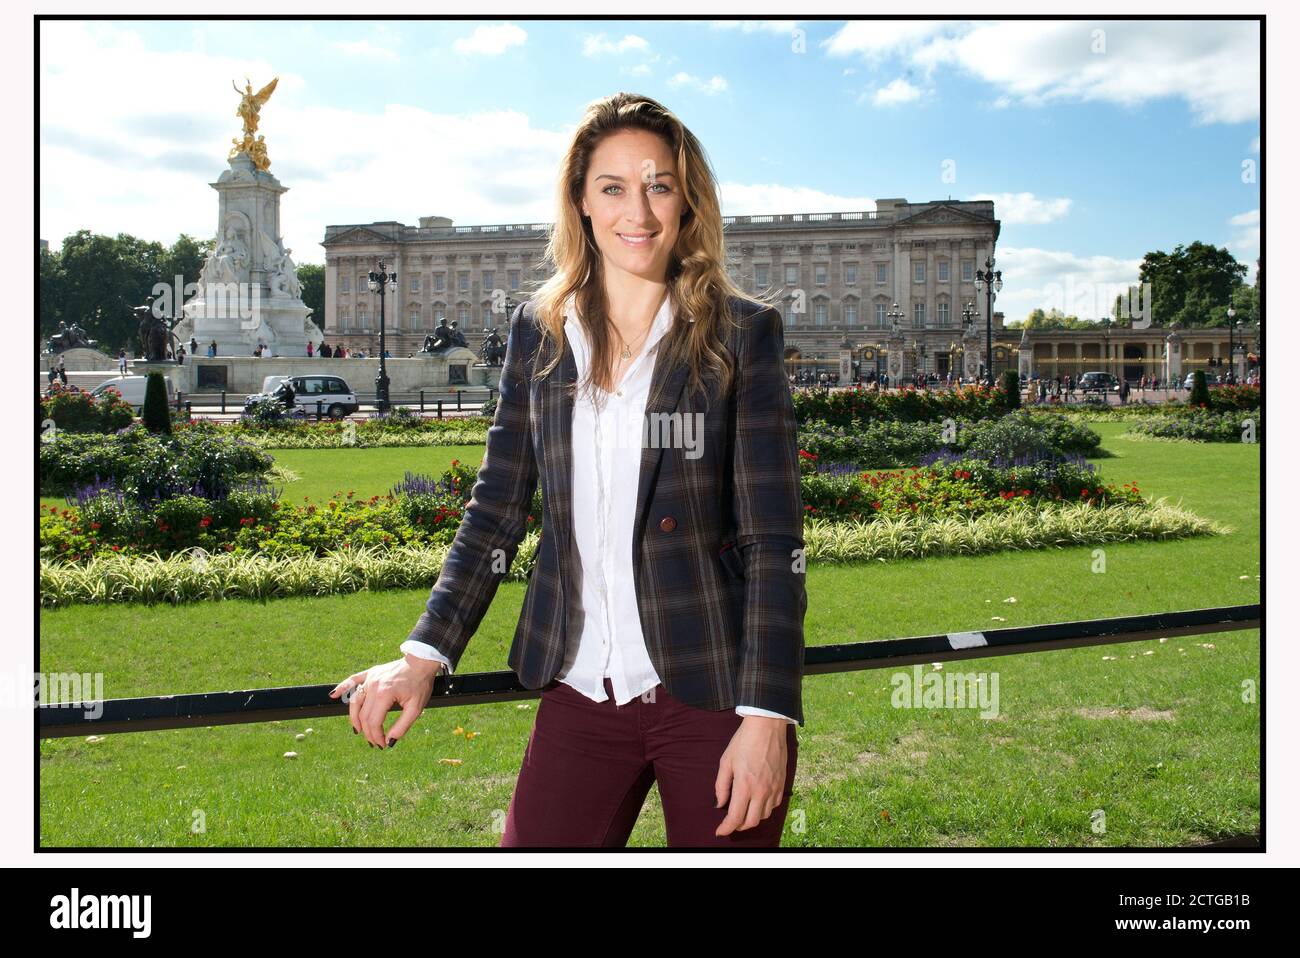 BRITISH SKELETON OLYMPIC CHAMPION AMY WILLIAMS PHOTOGRAPHED IN FRONT OF BUCKINGHAM PALACE.   PICTURE CREDIT : © Mark Pain / ALAMY STOCK PHOTO Stock Photo